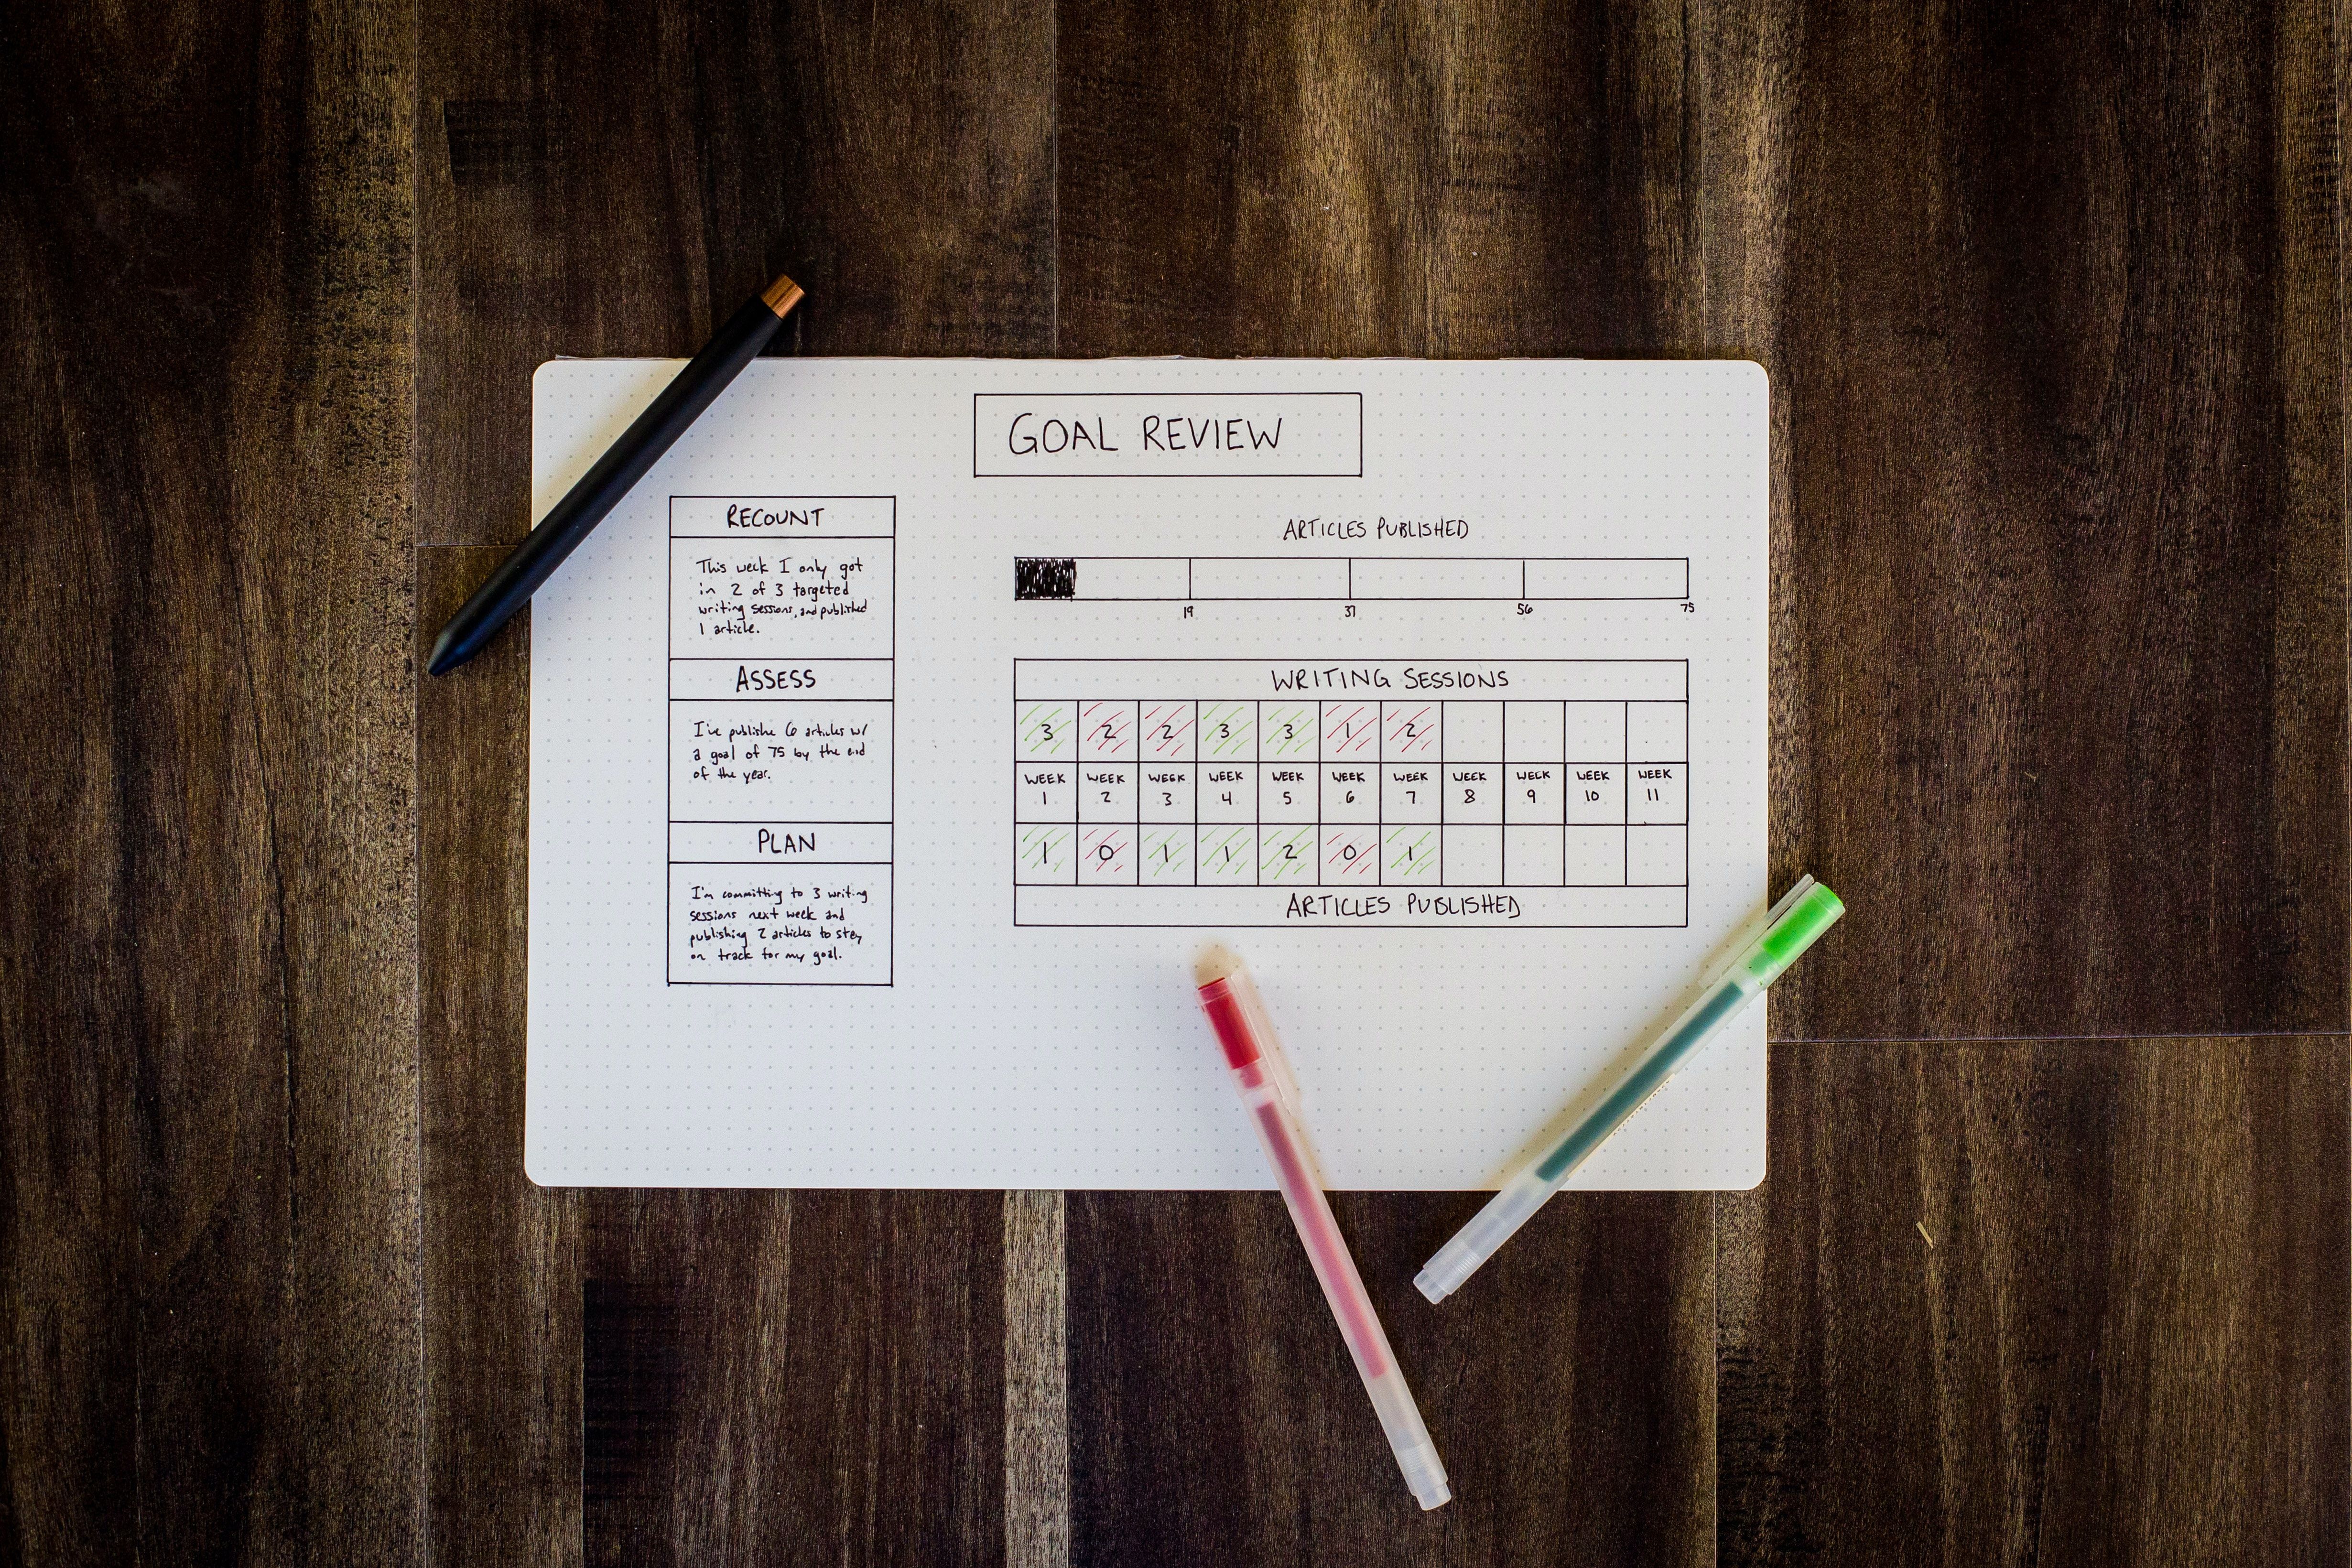 Goal Tracking calendar in a paper planner